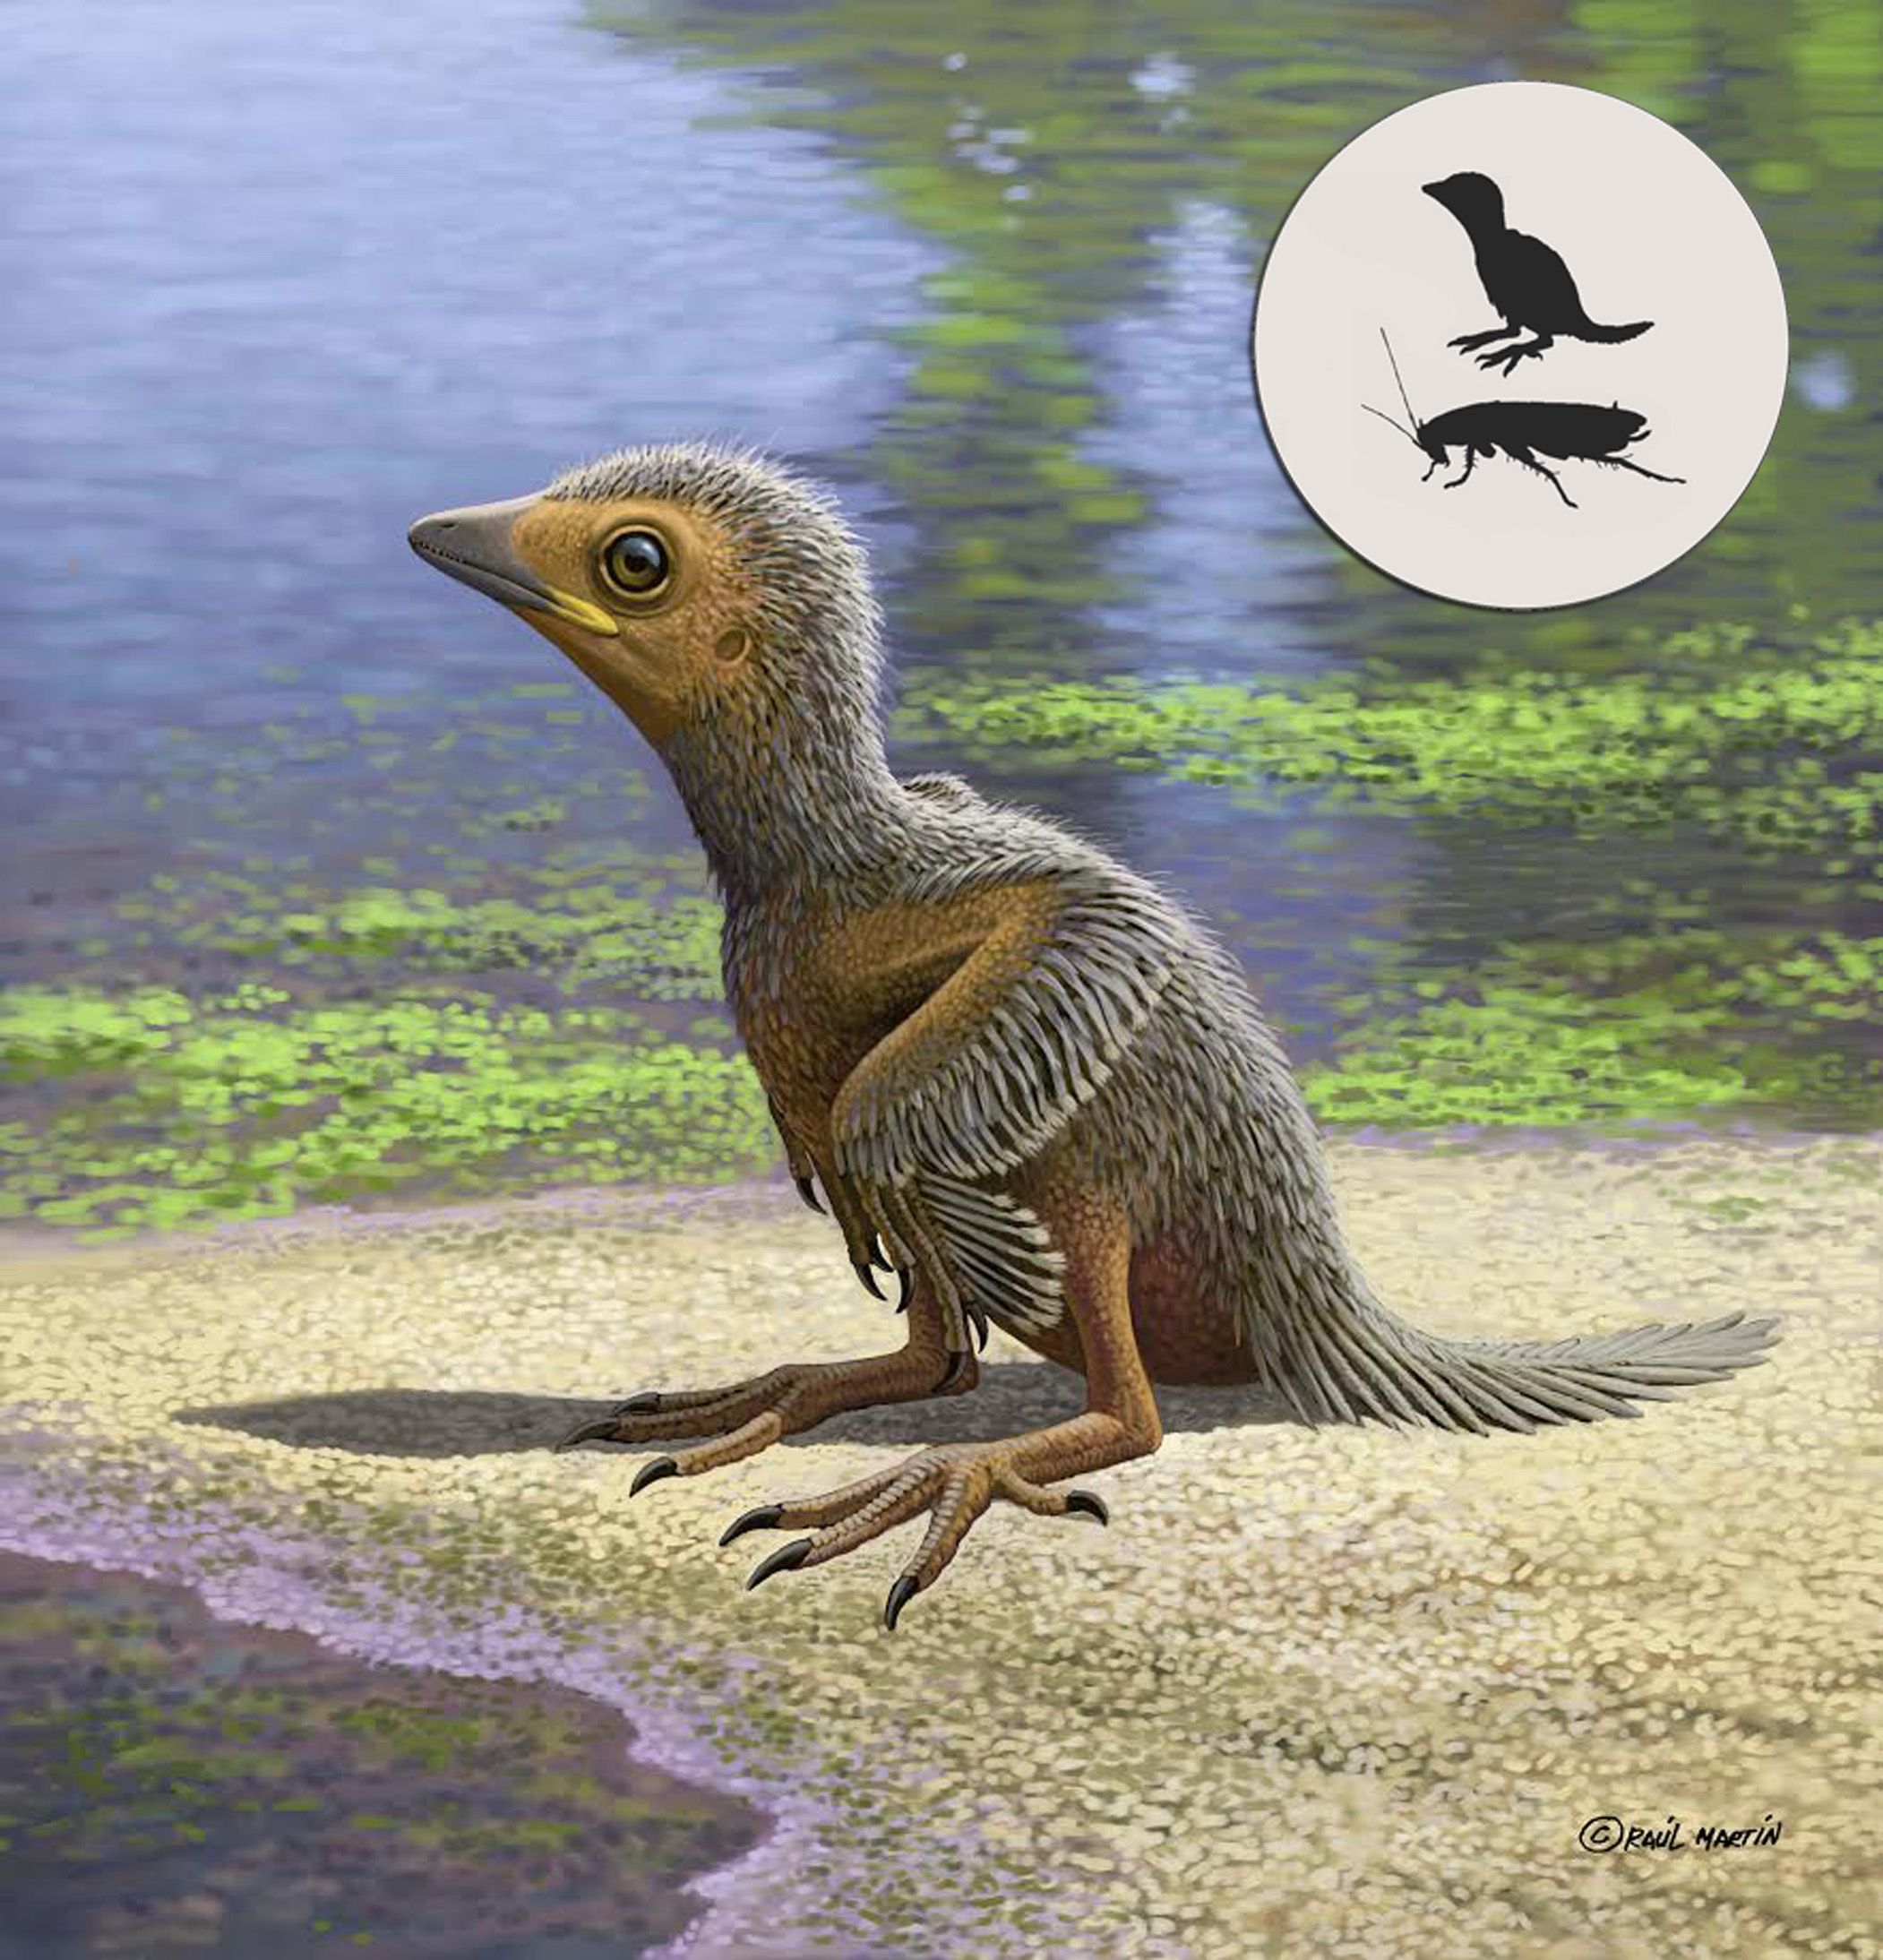 This little baby bird lived 127 million years ago and died the size of your pinky